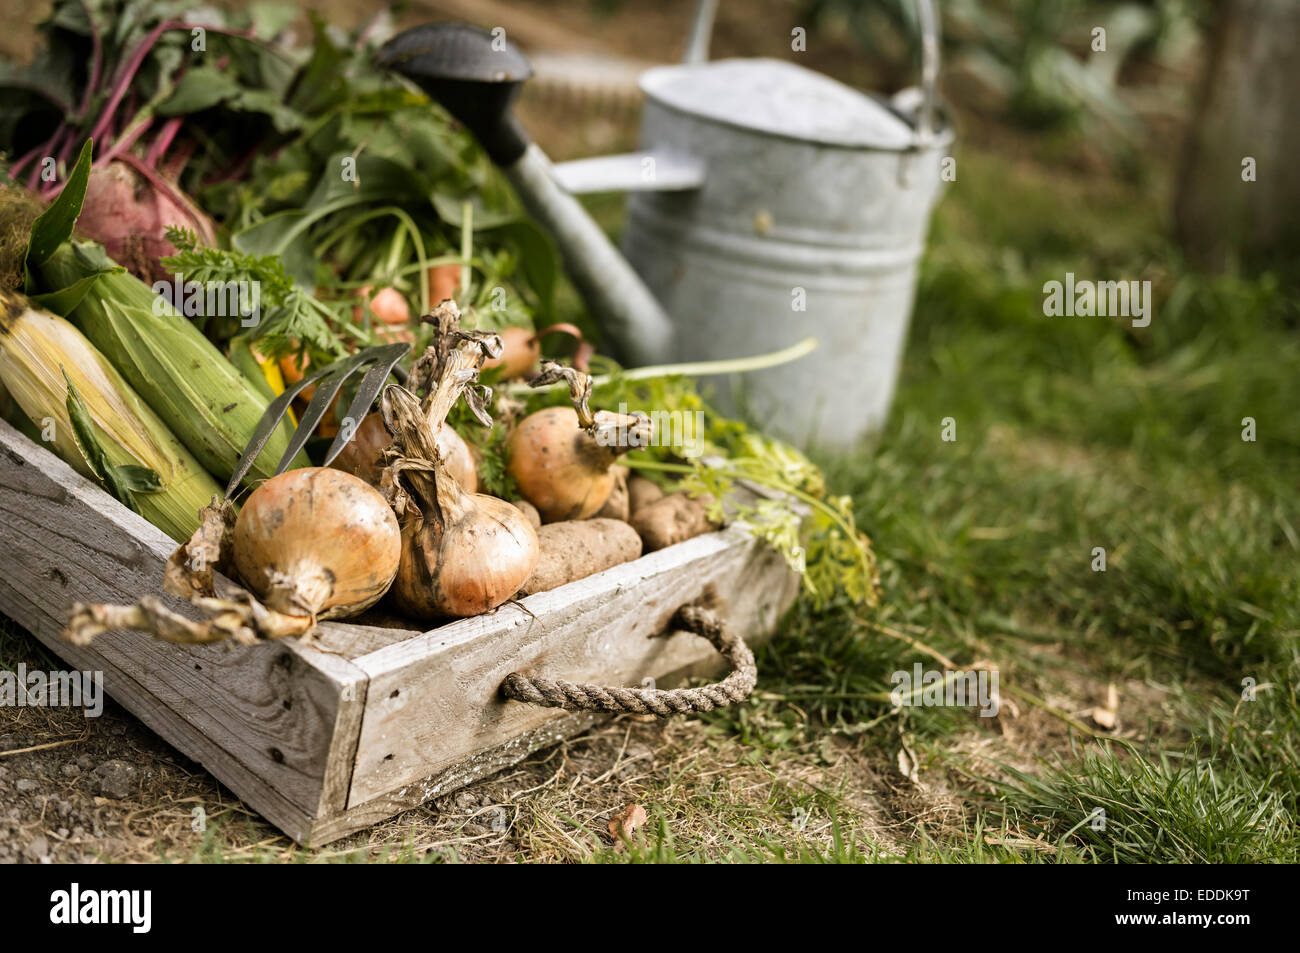 Watering can and wooden box full of freshly picked vegetables, including carrots, onions, beetroots, corn and potatoes. Stock Photo